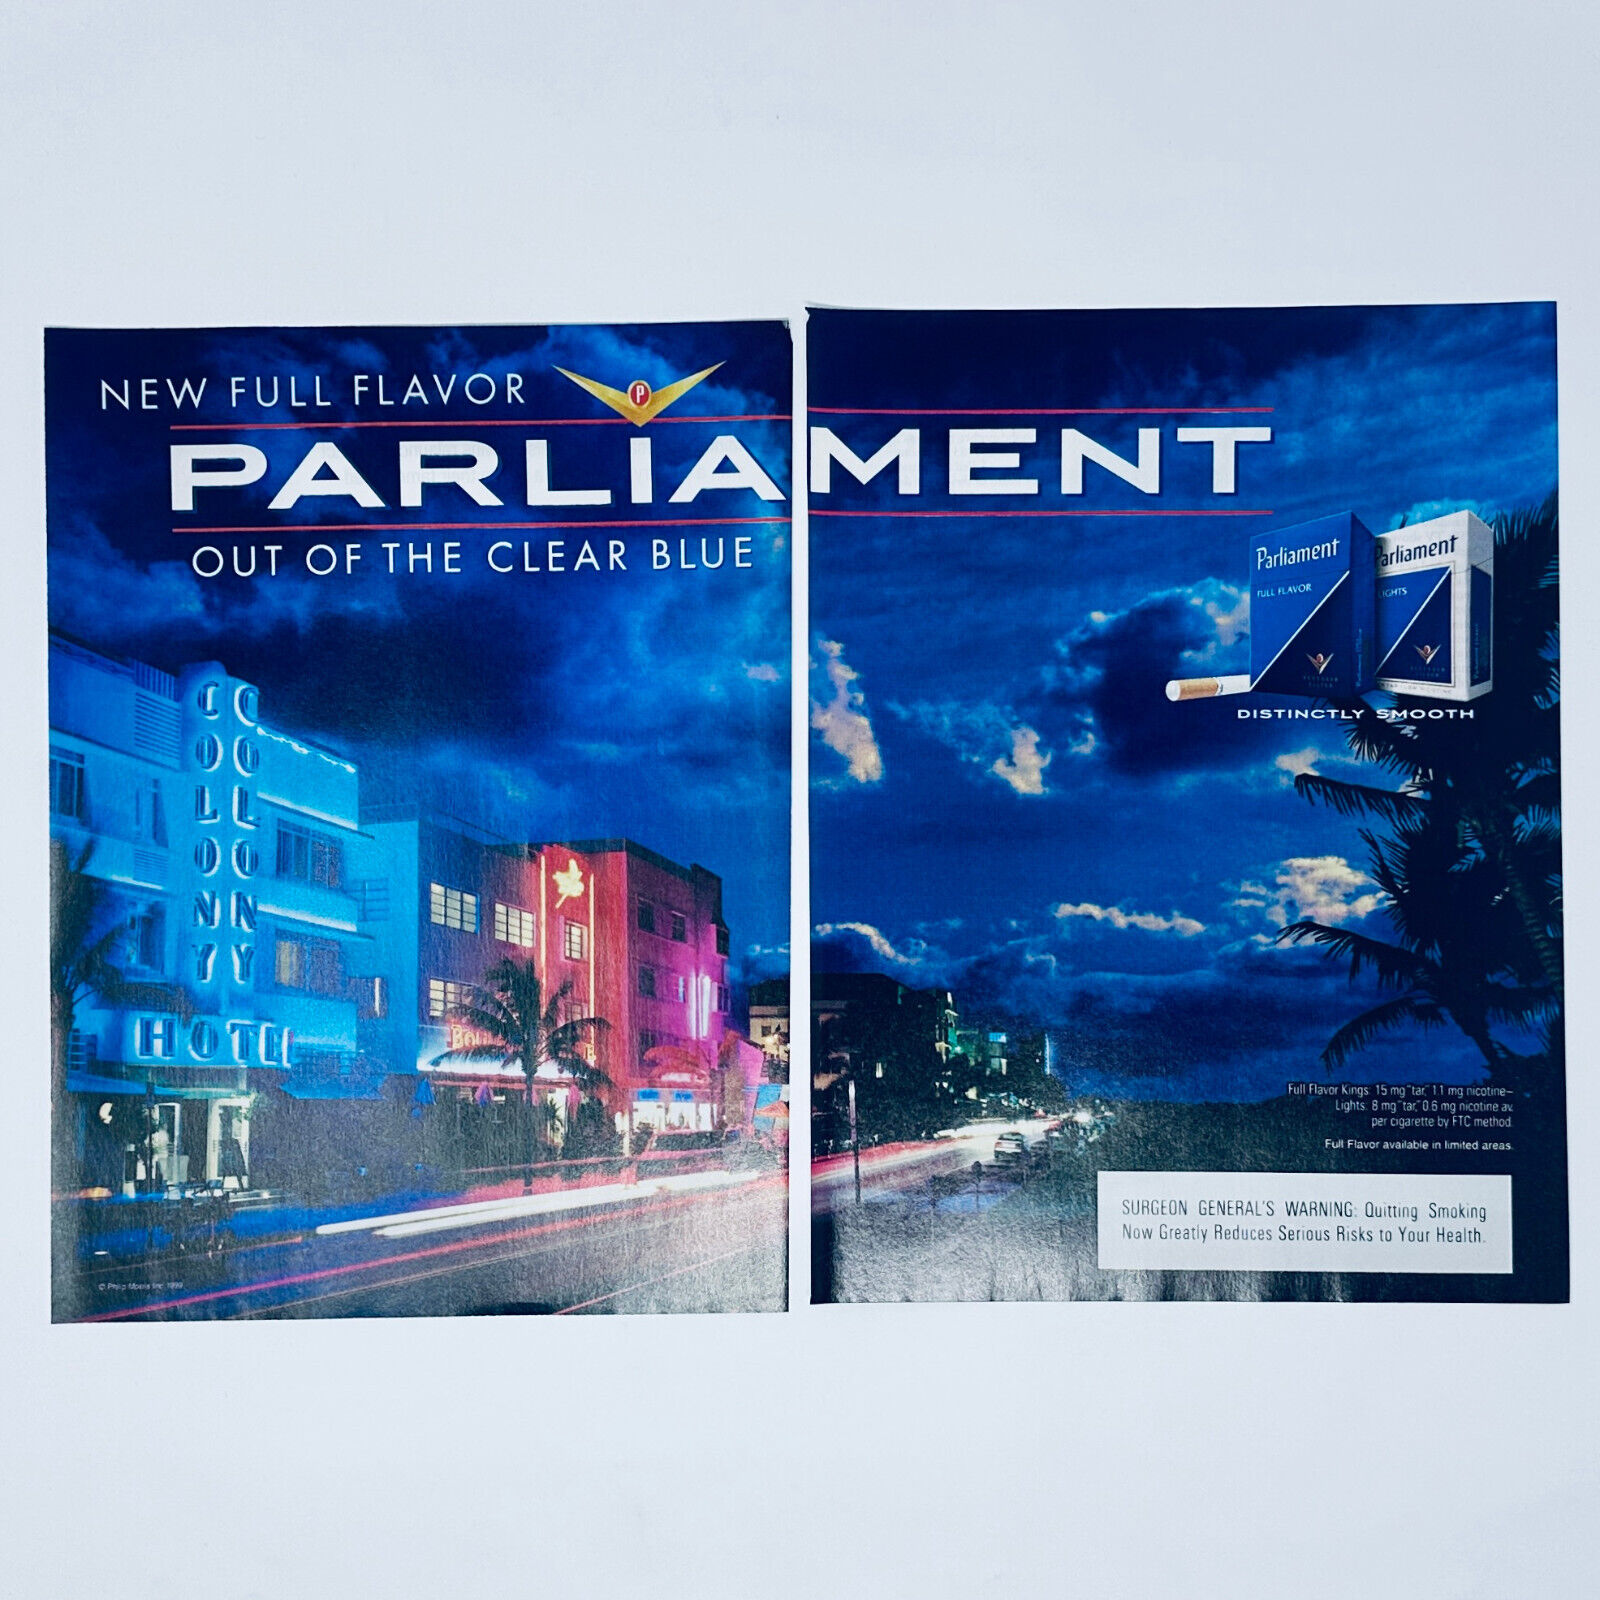 Parliament Cigarettes Full Flavor Out of the Clear Blue 2 Page Print Advert